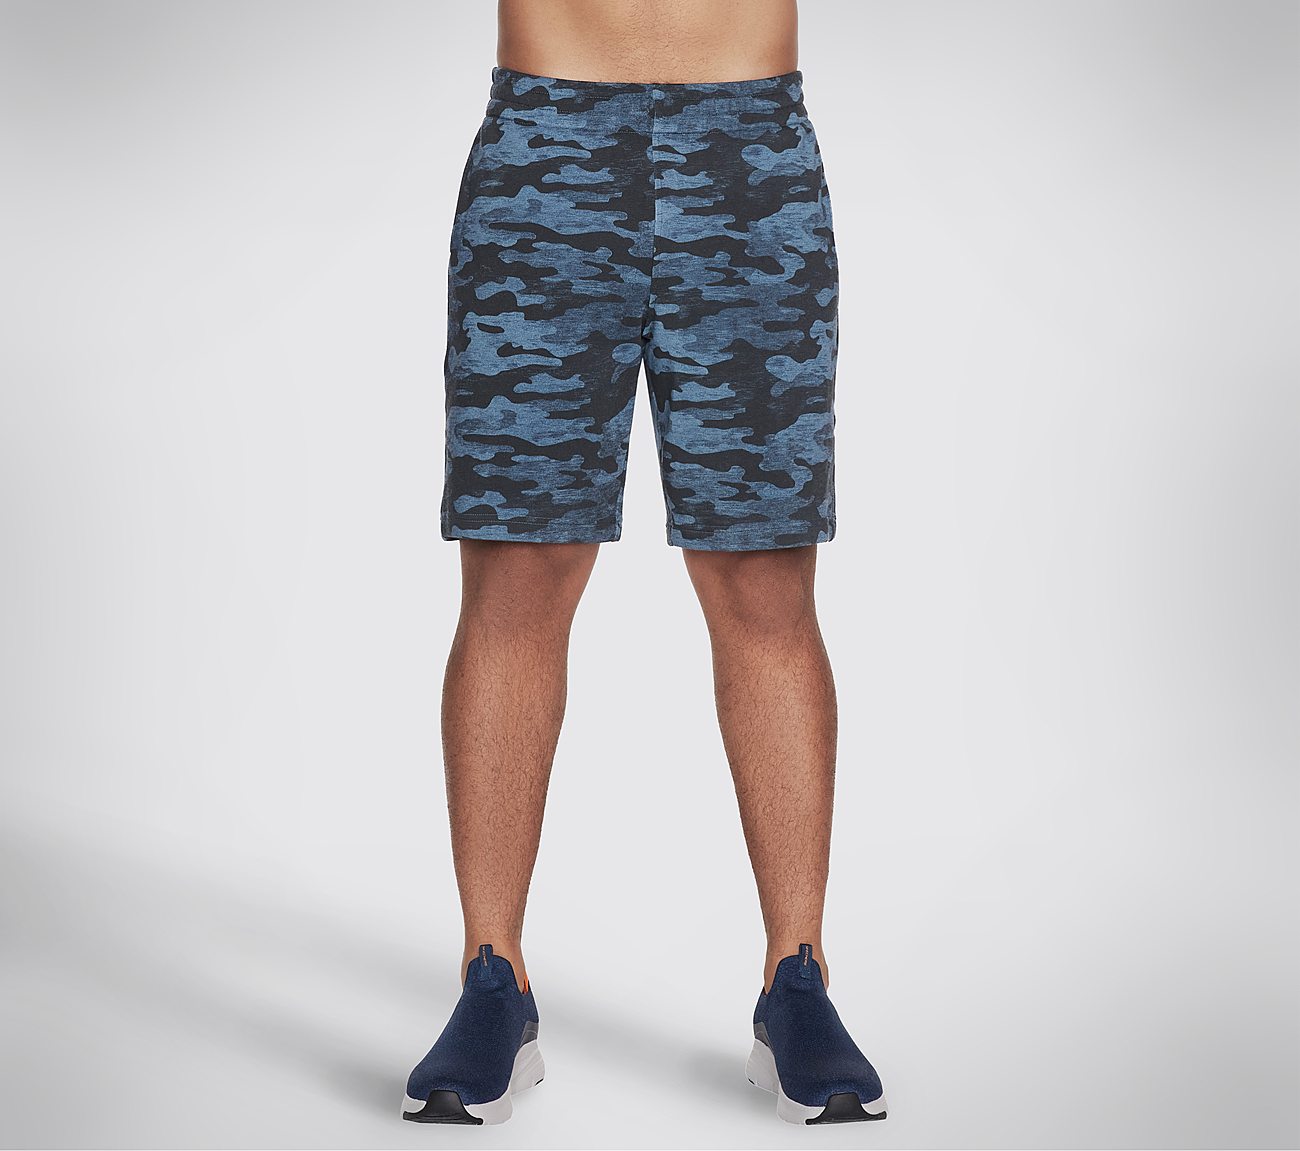 SKECH-SWEATS CAMO LOUNGE 9 SH, NAVY/MULTI Apparels Lateral View